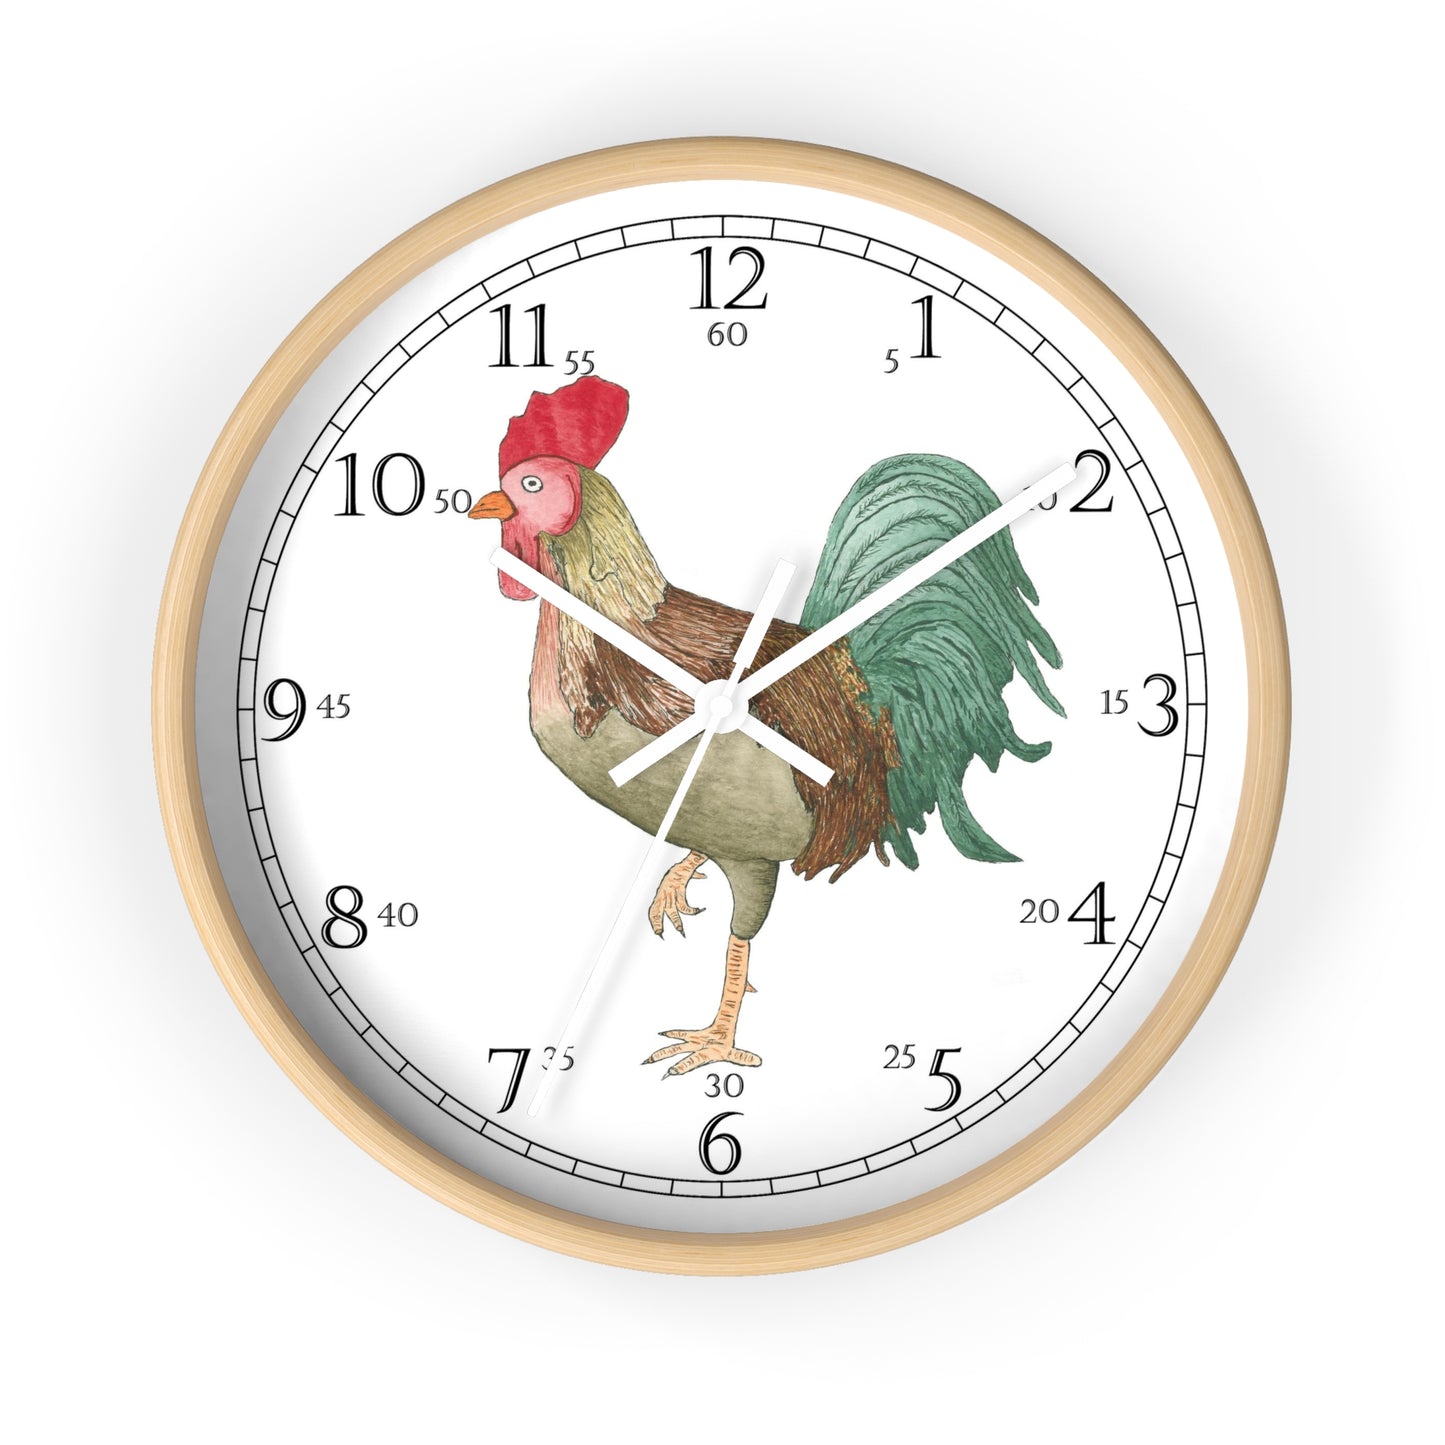 Michael Rooster English Numeral Clock